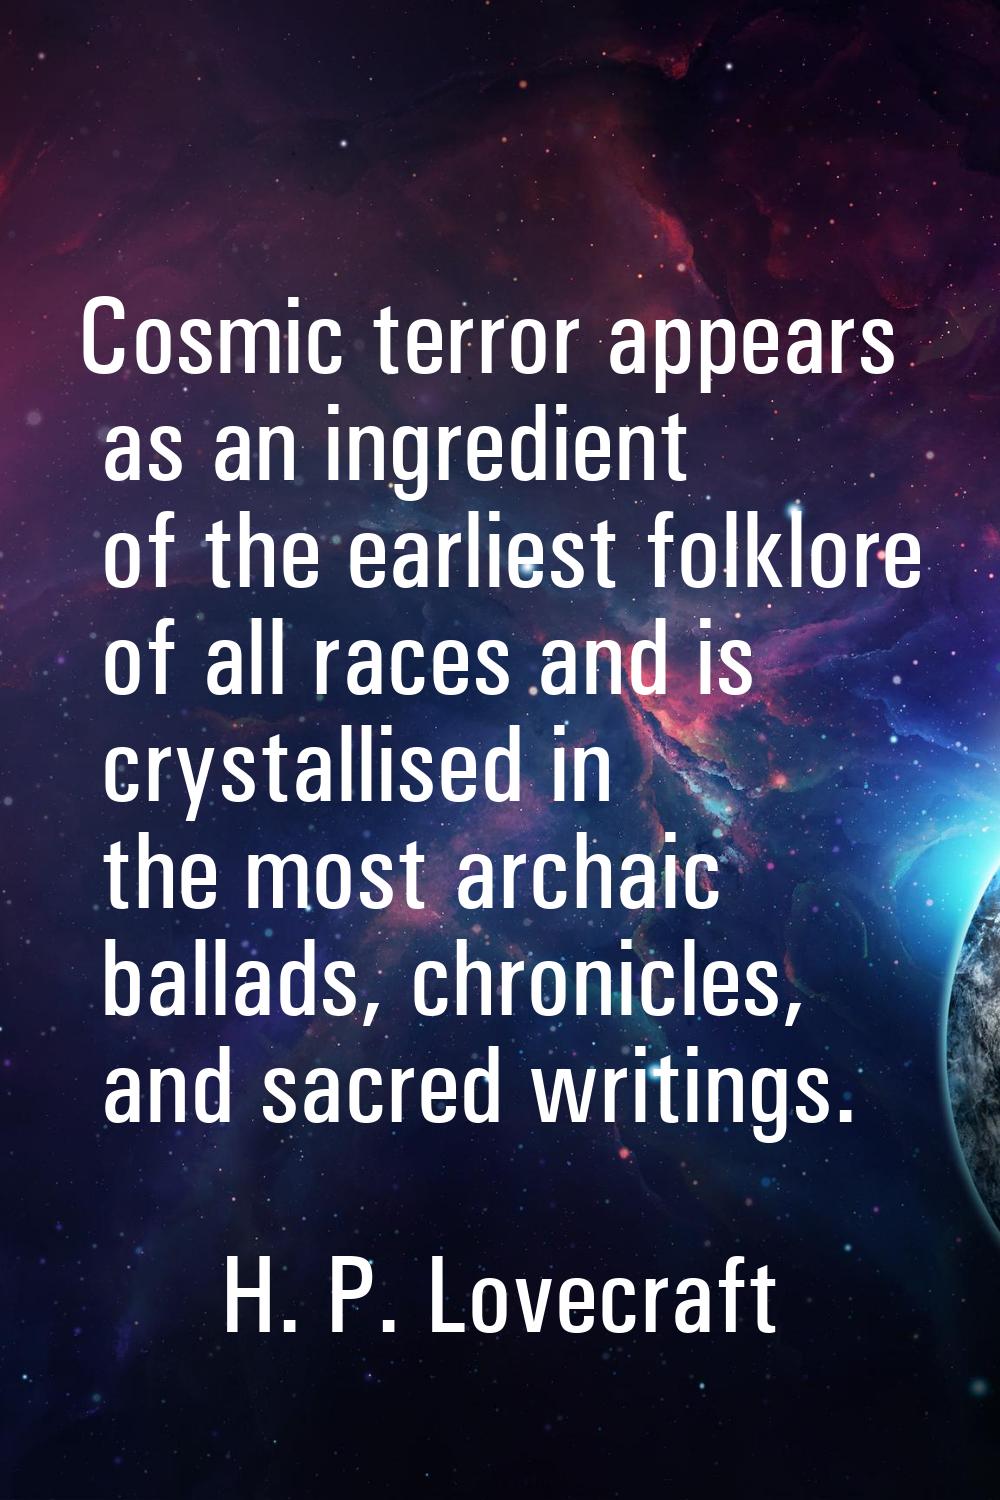 Cosmic terror appears as an ingredient of the earliest folklore of all races and is crystallised in